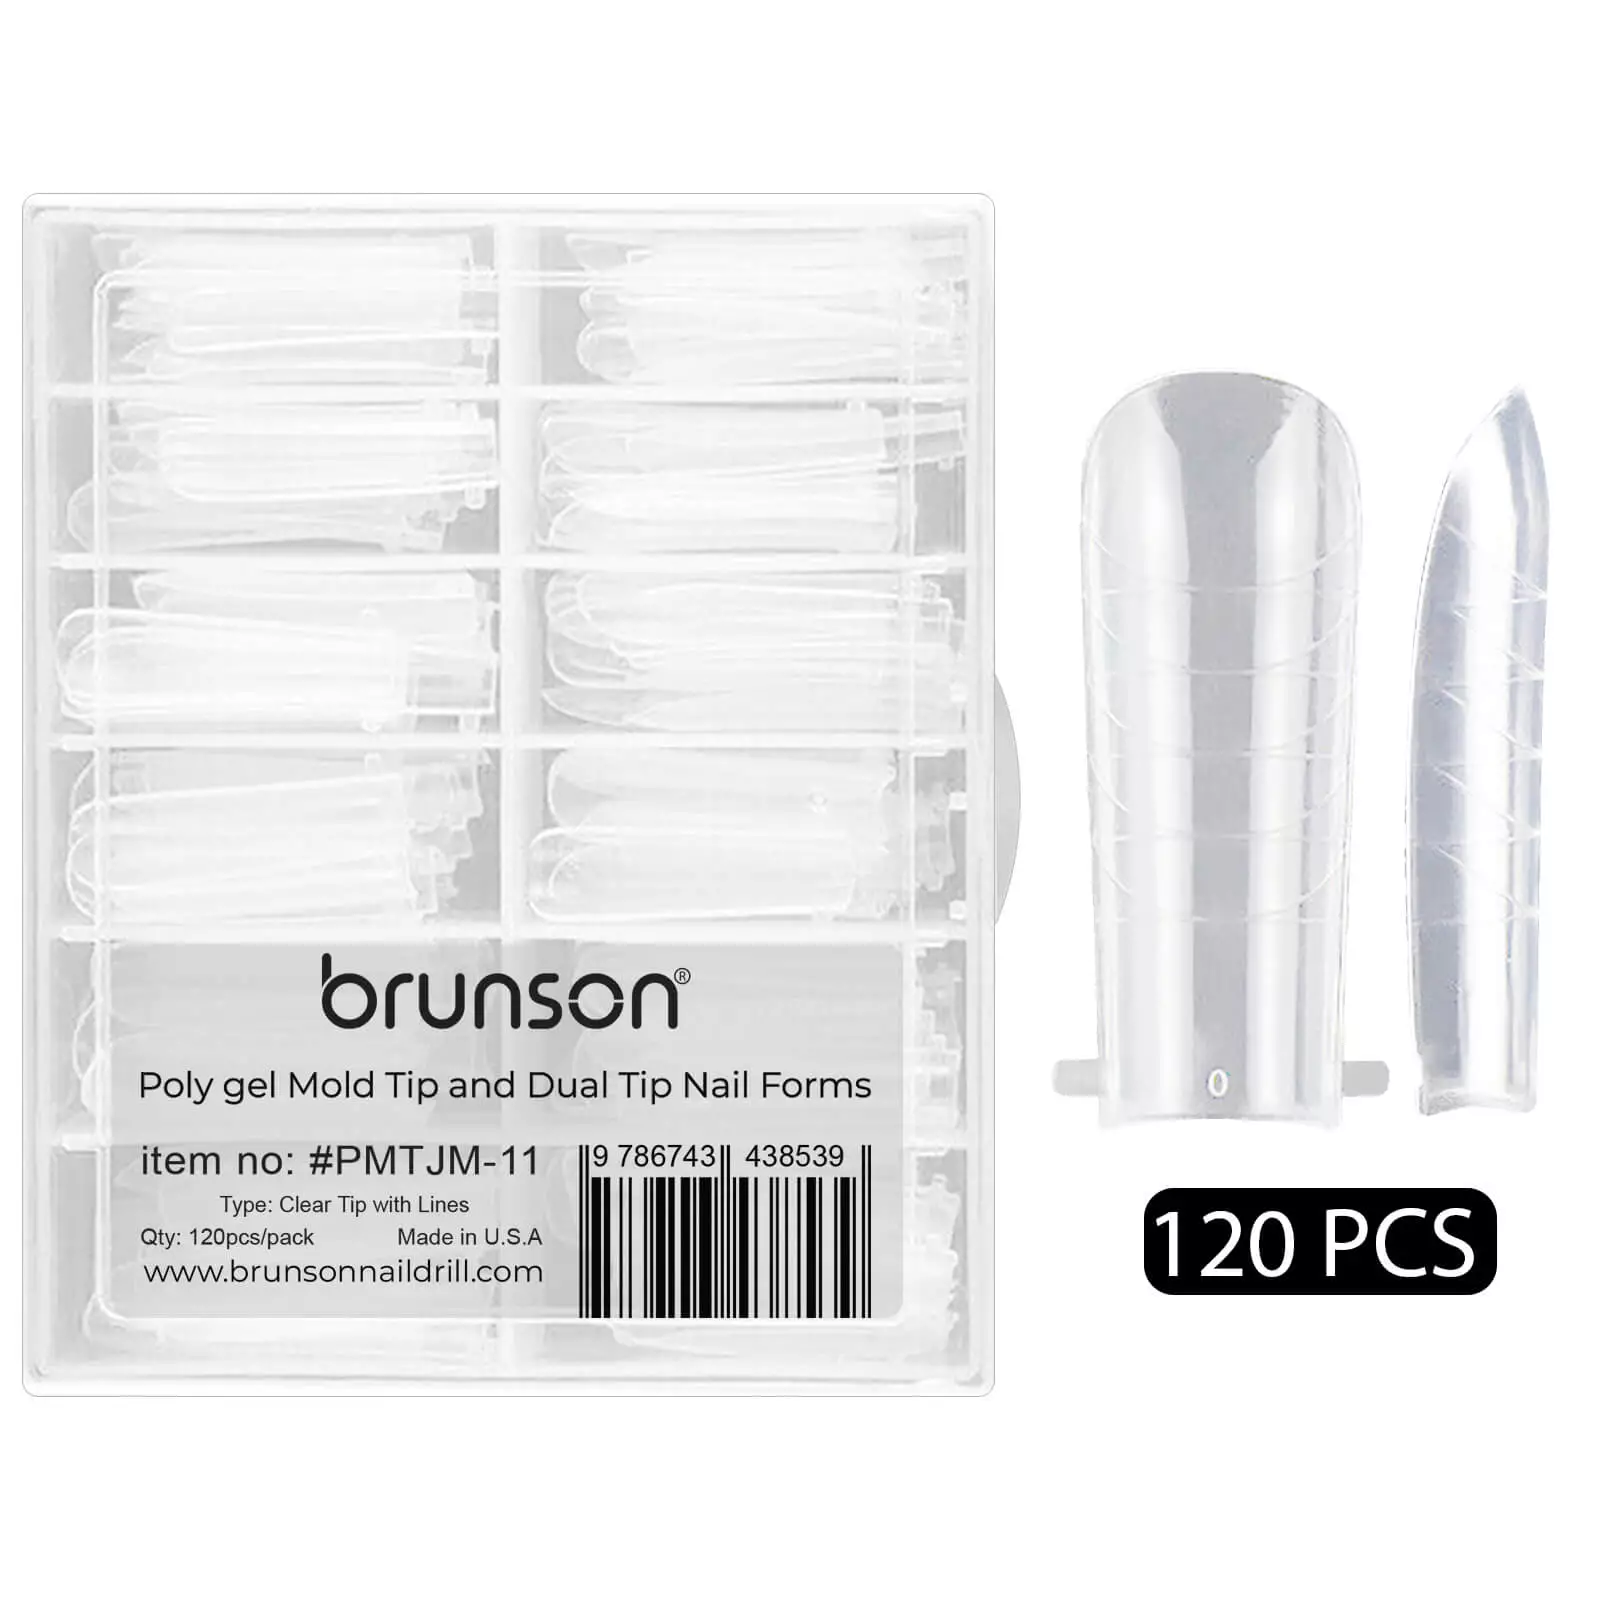 Poly-Gel-Mold-Tip-and-Dual-Tip-Nail-Forms-PMTJM-11-Brunson-1